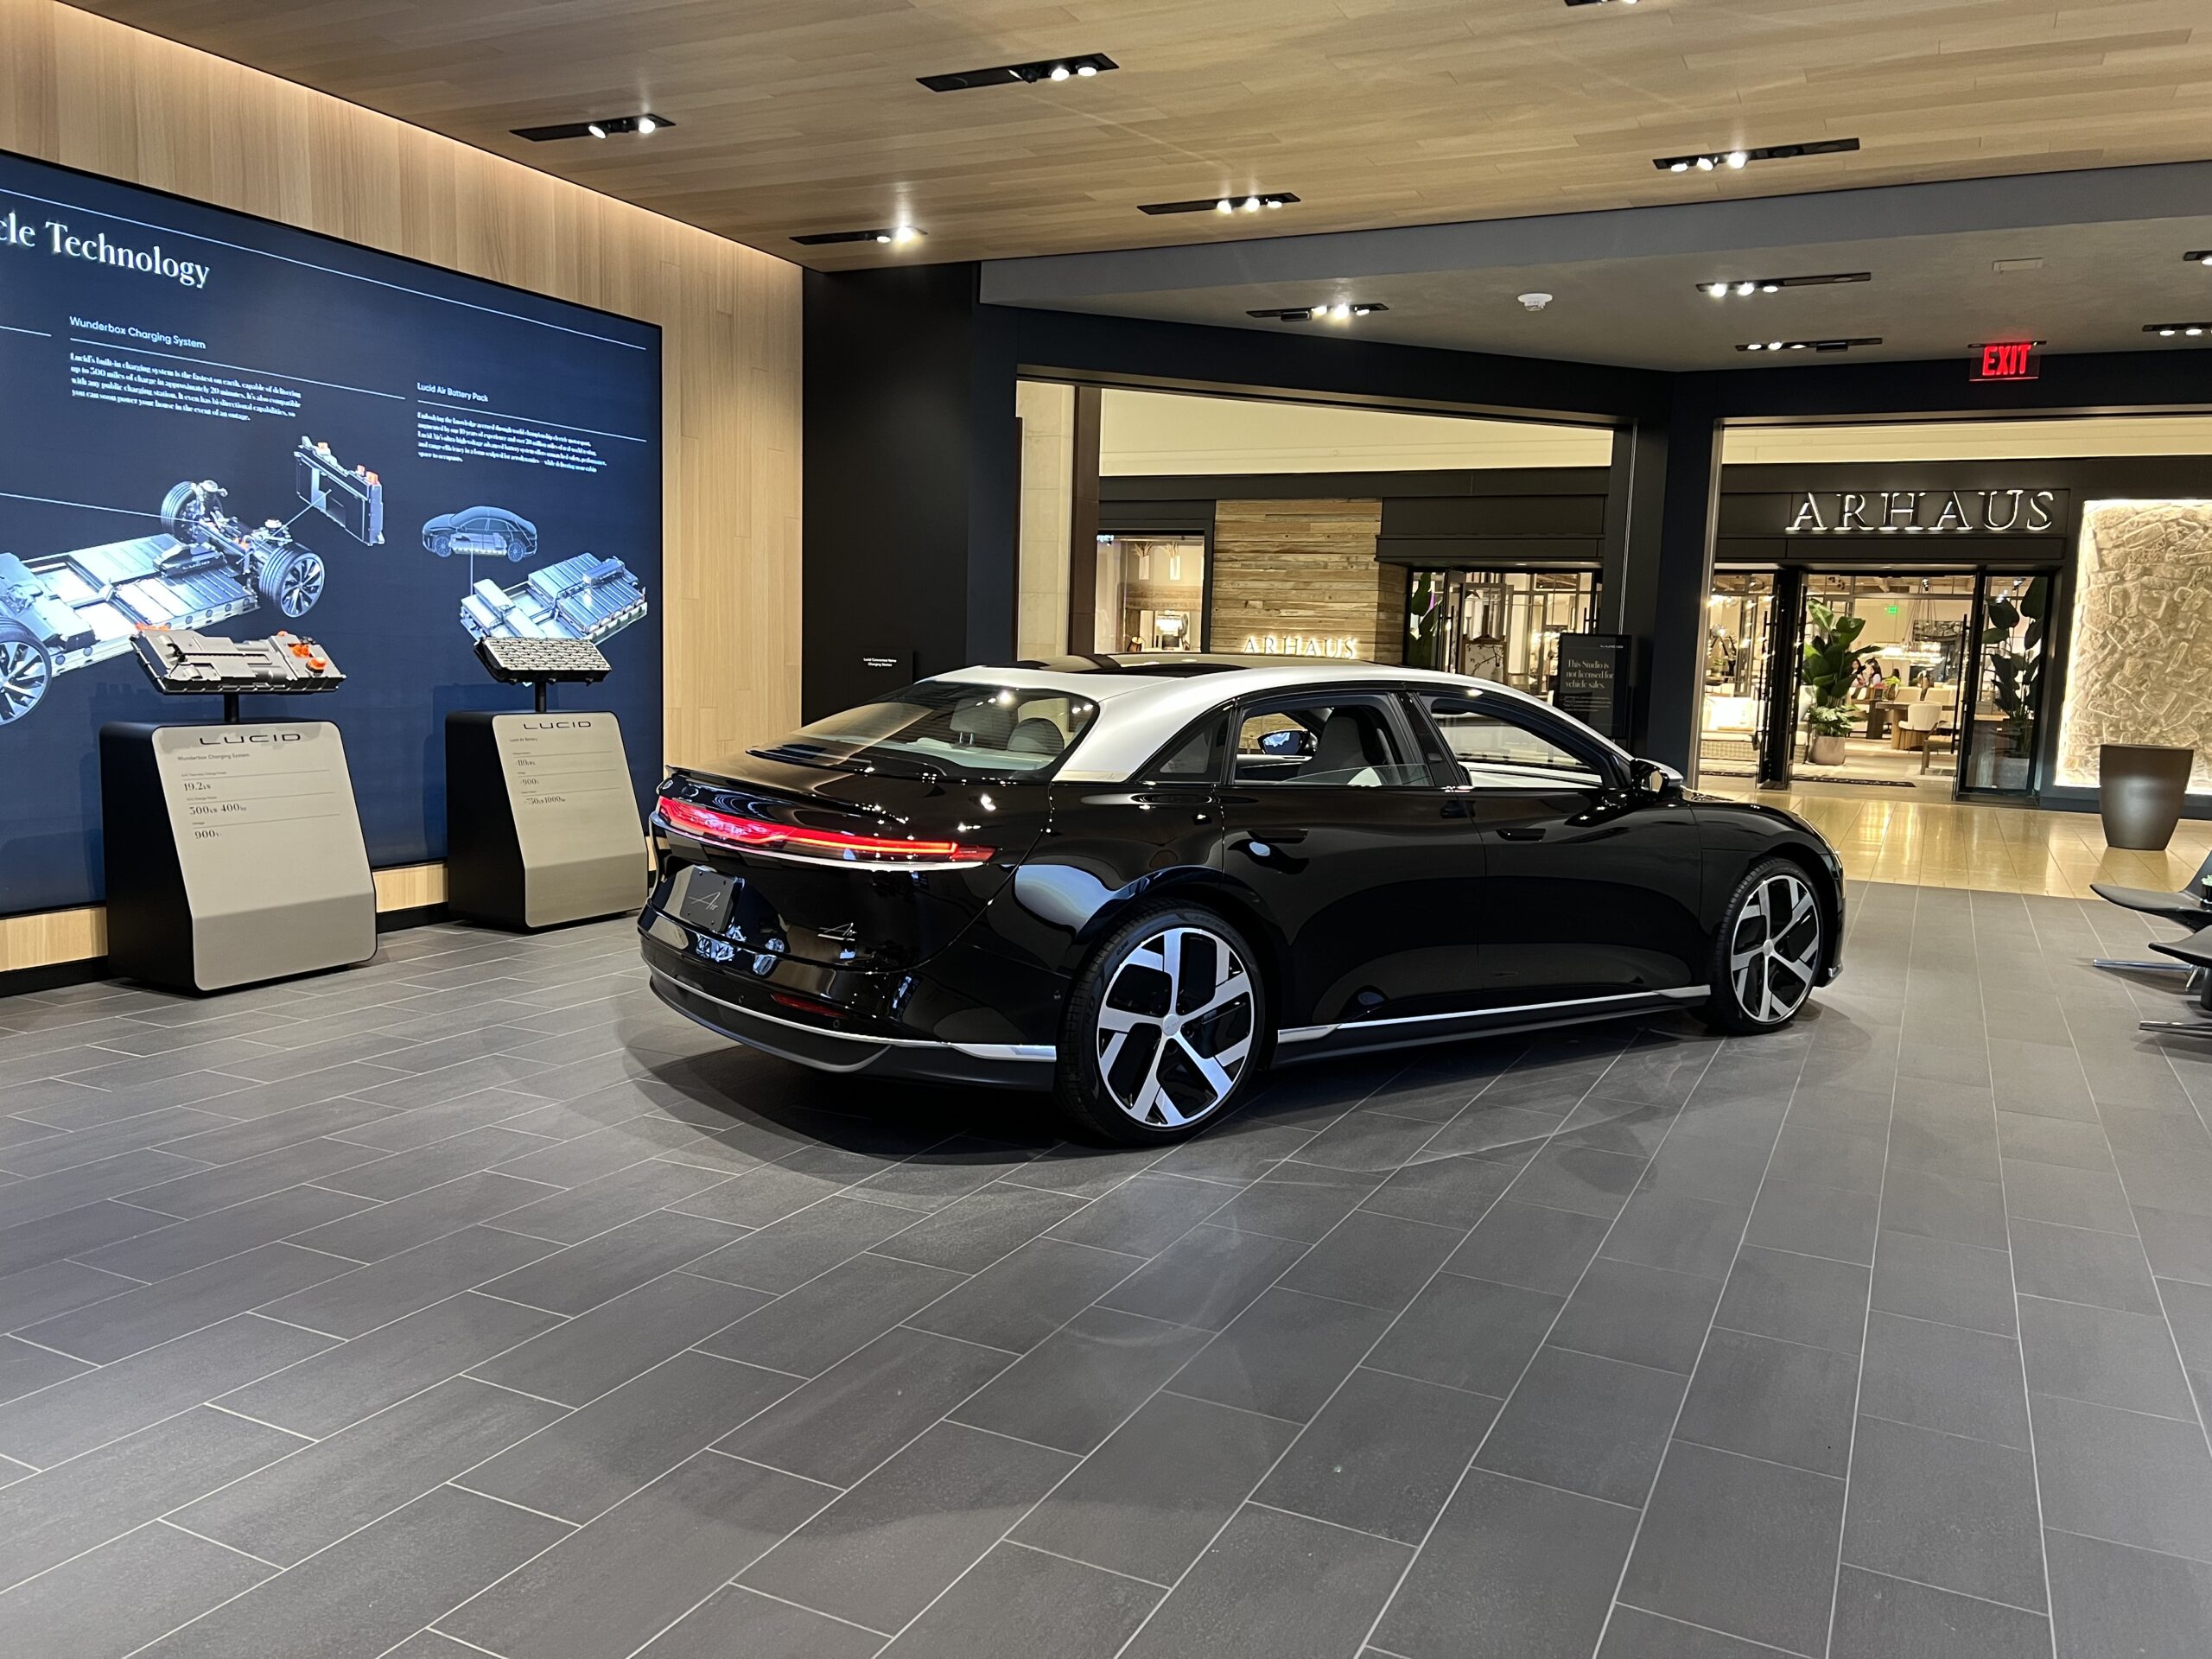 Mall at Short Hills to open studio for luxury electric vehicles